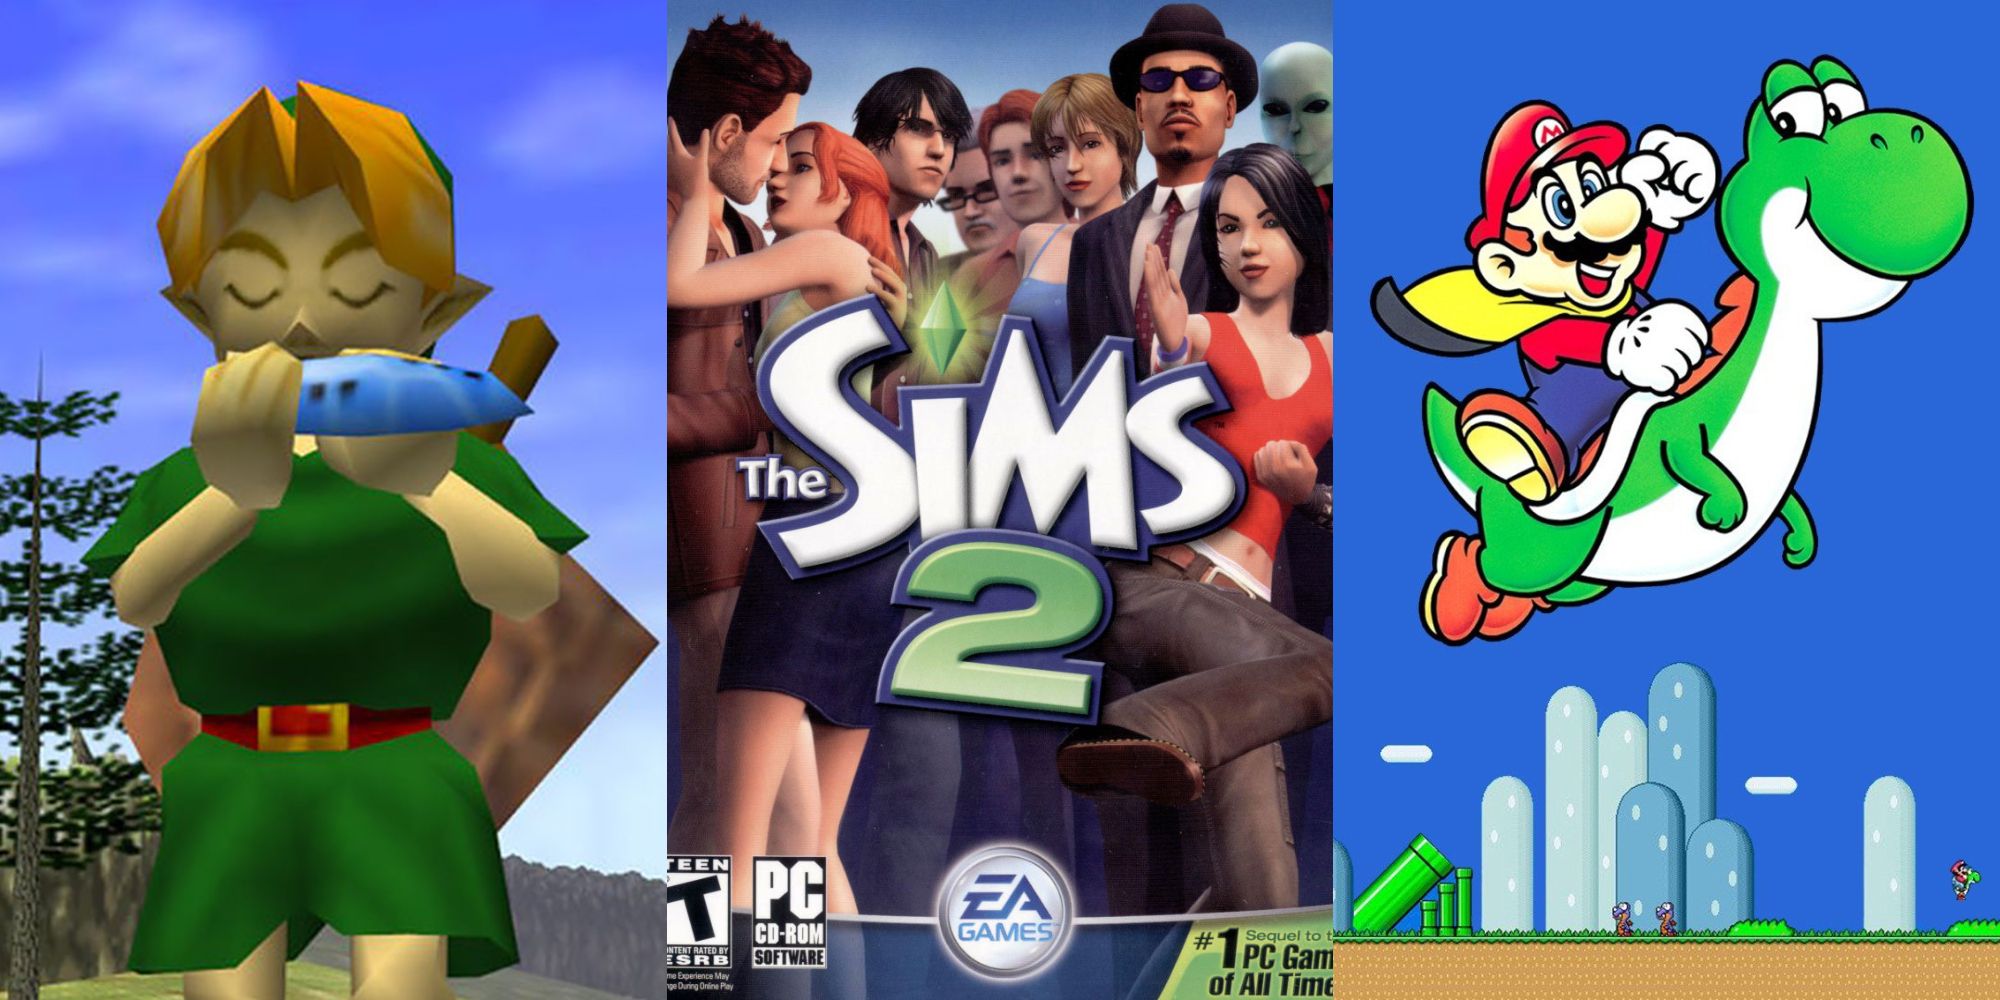 The 10 Best Video Games Ever Made, According To Reddit